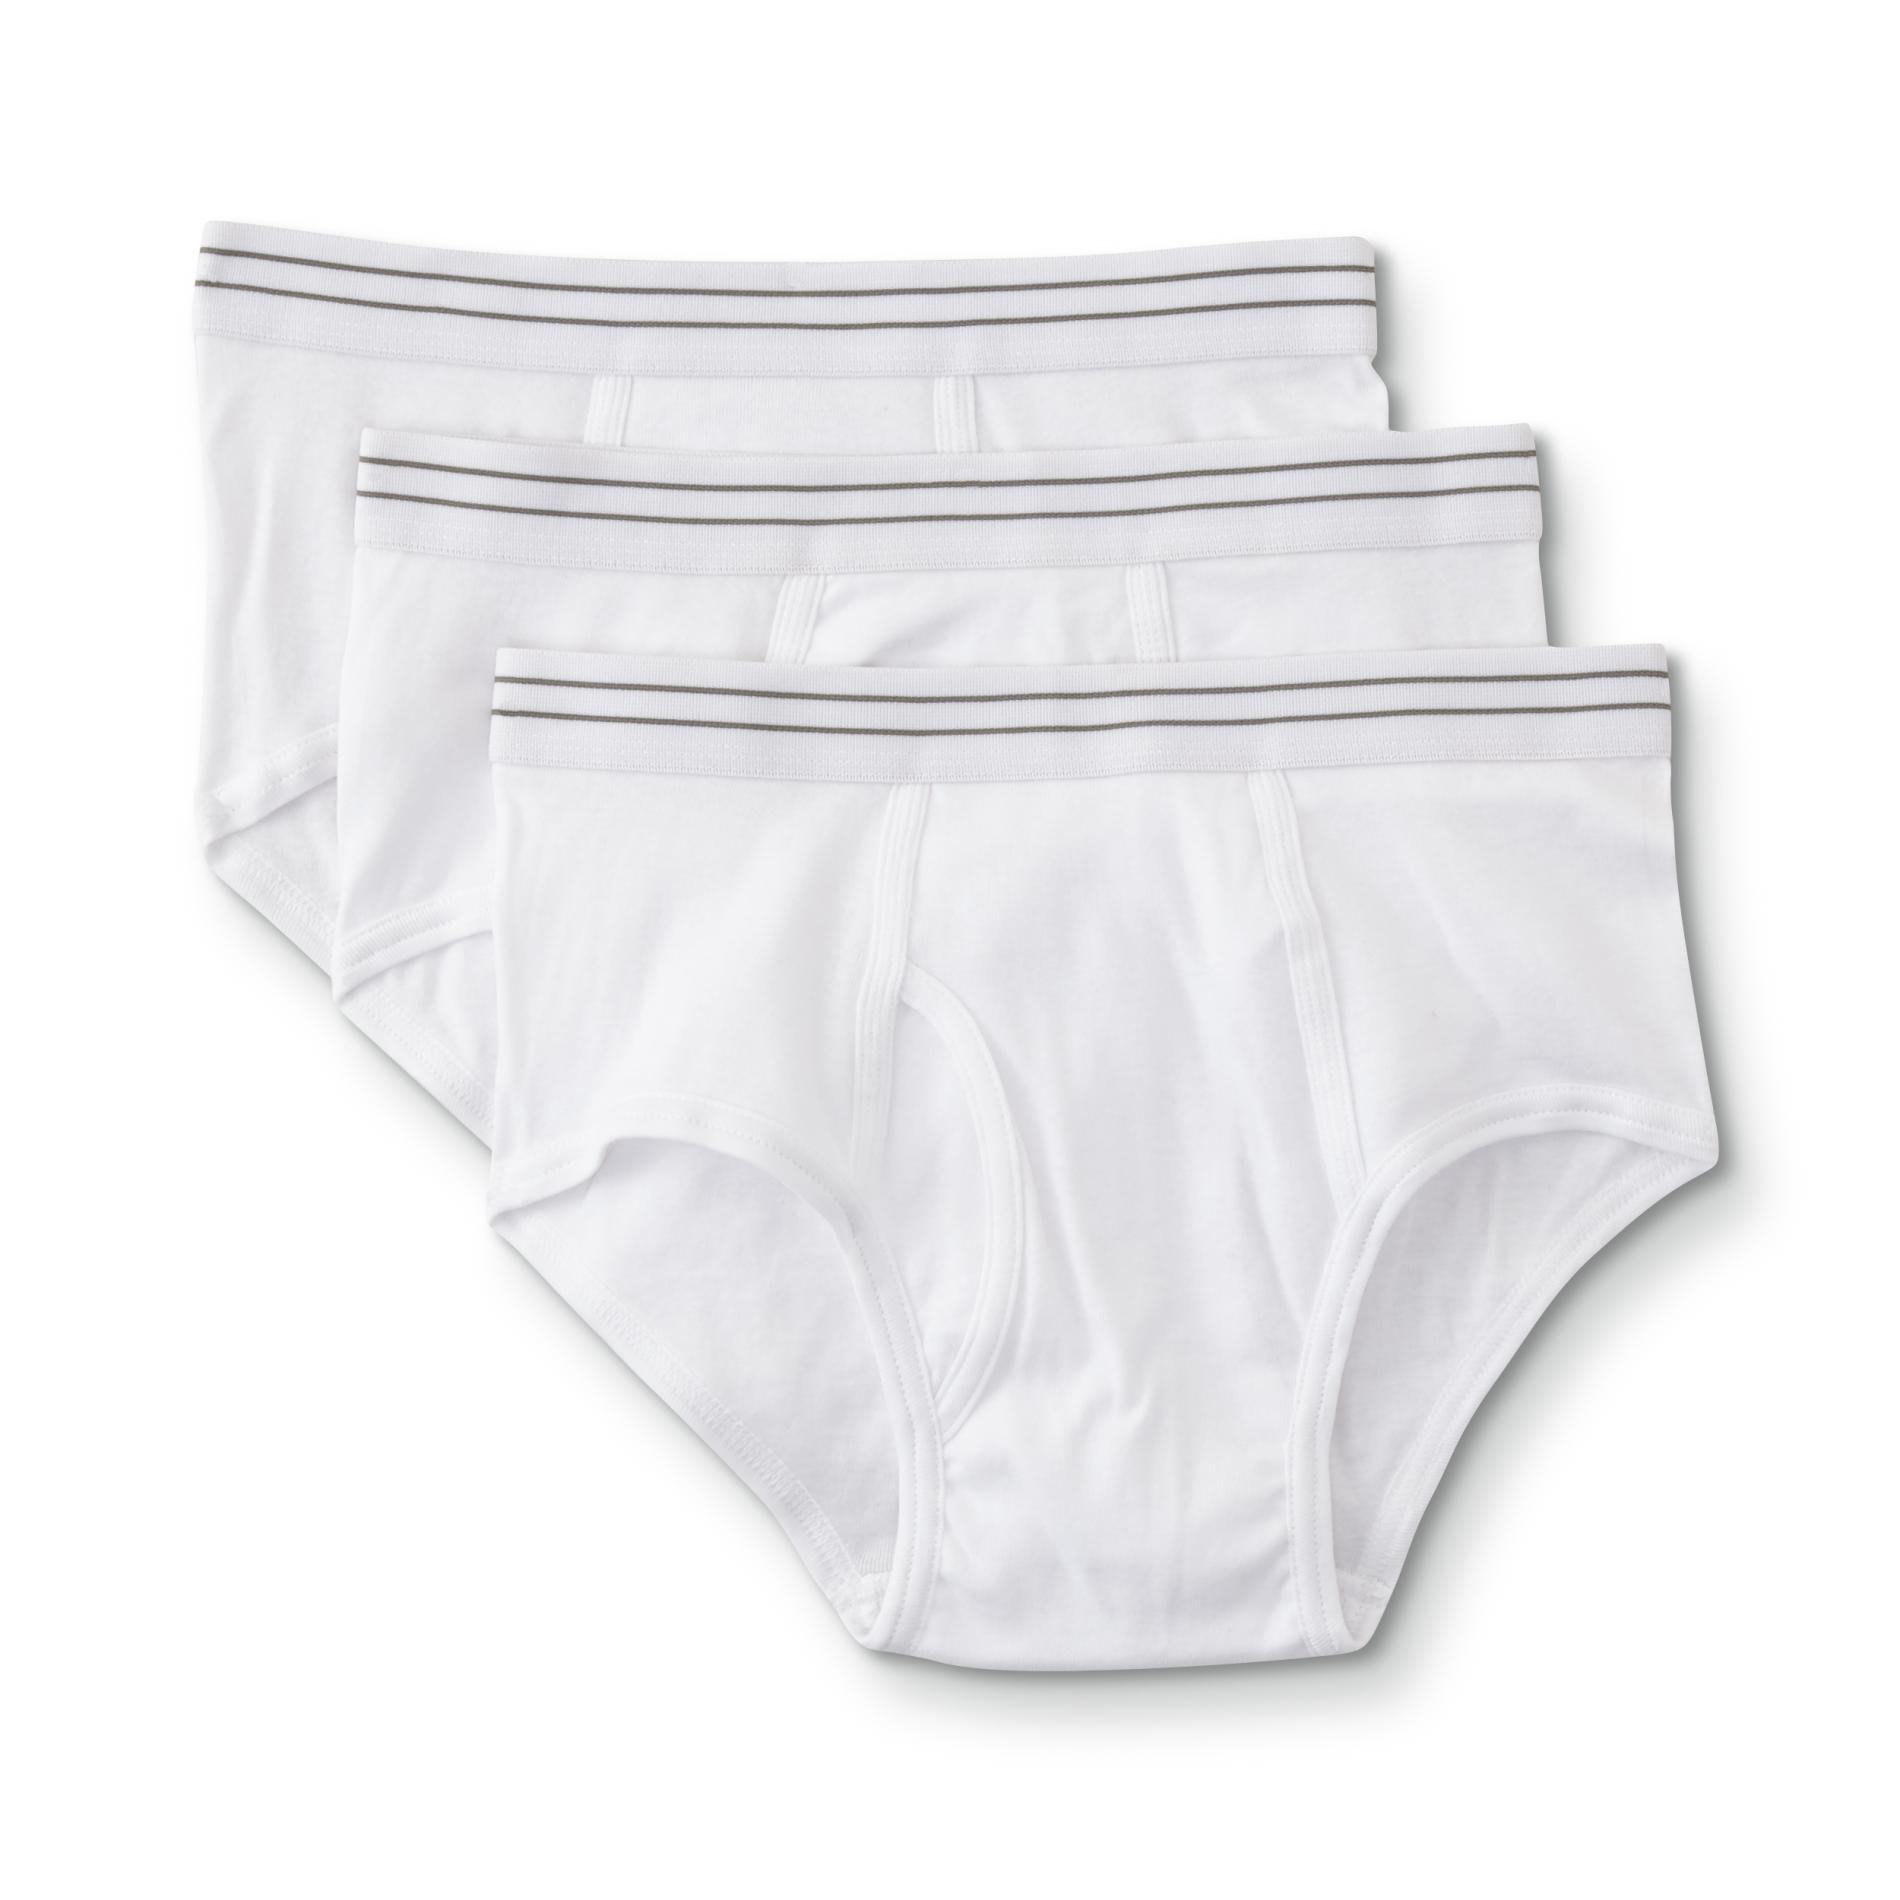 Simply Styled Men's Big & Tall 3-Pack Briefs